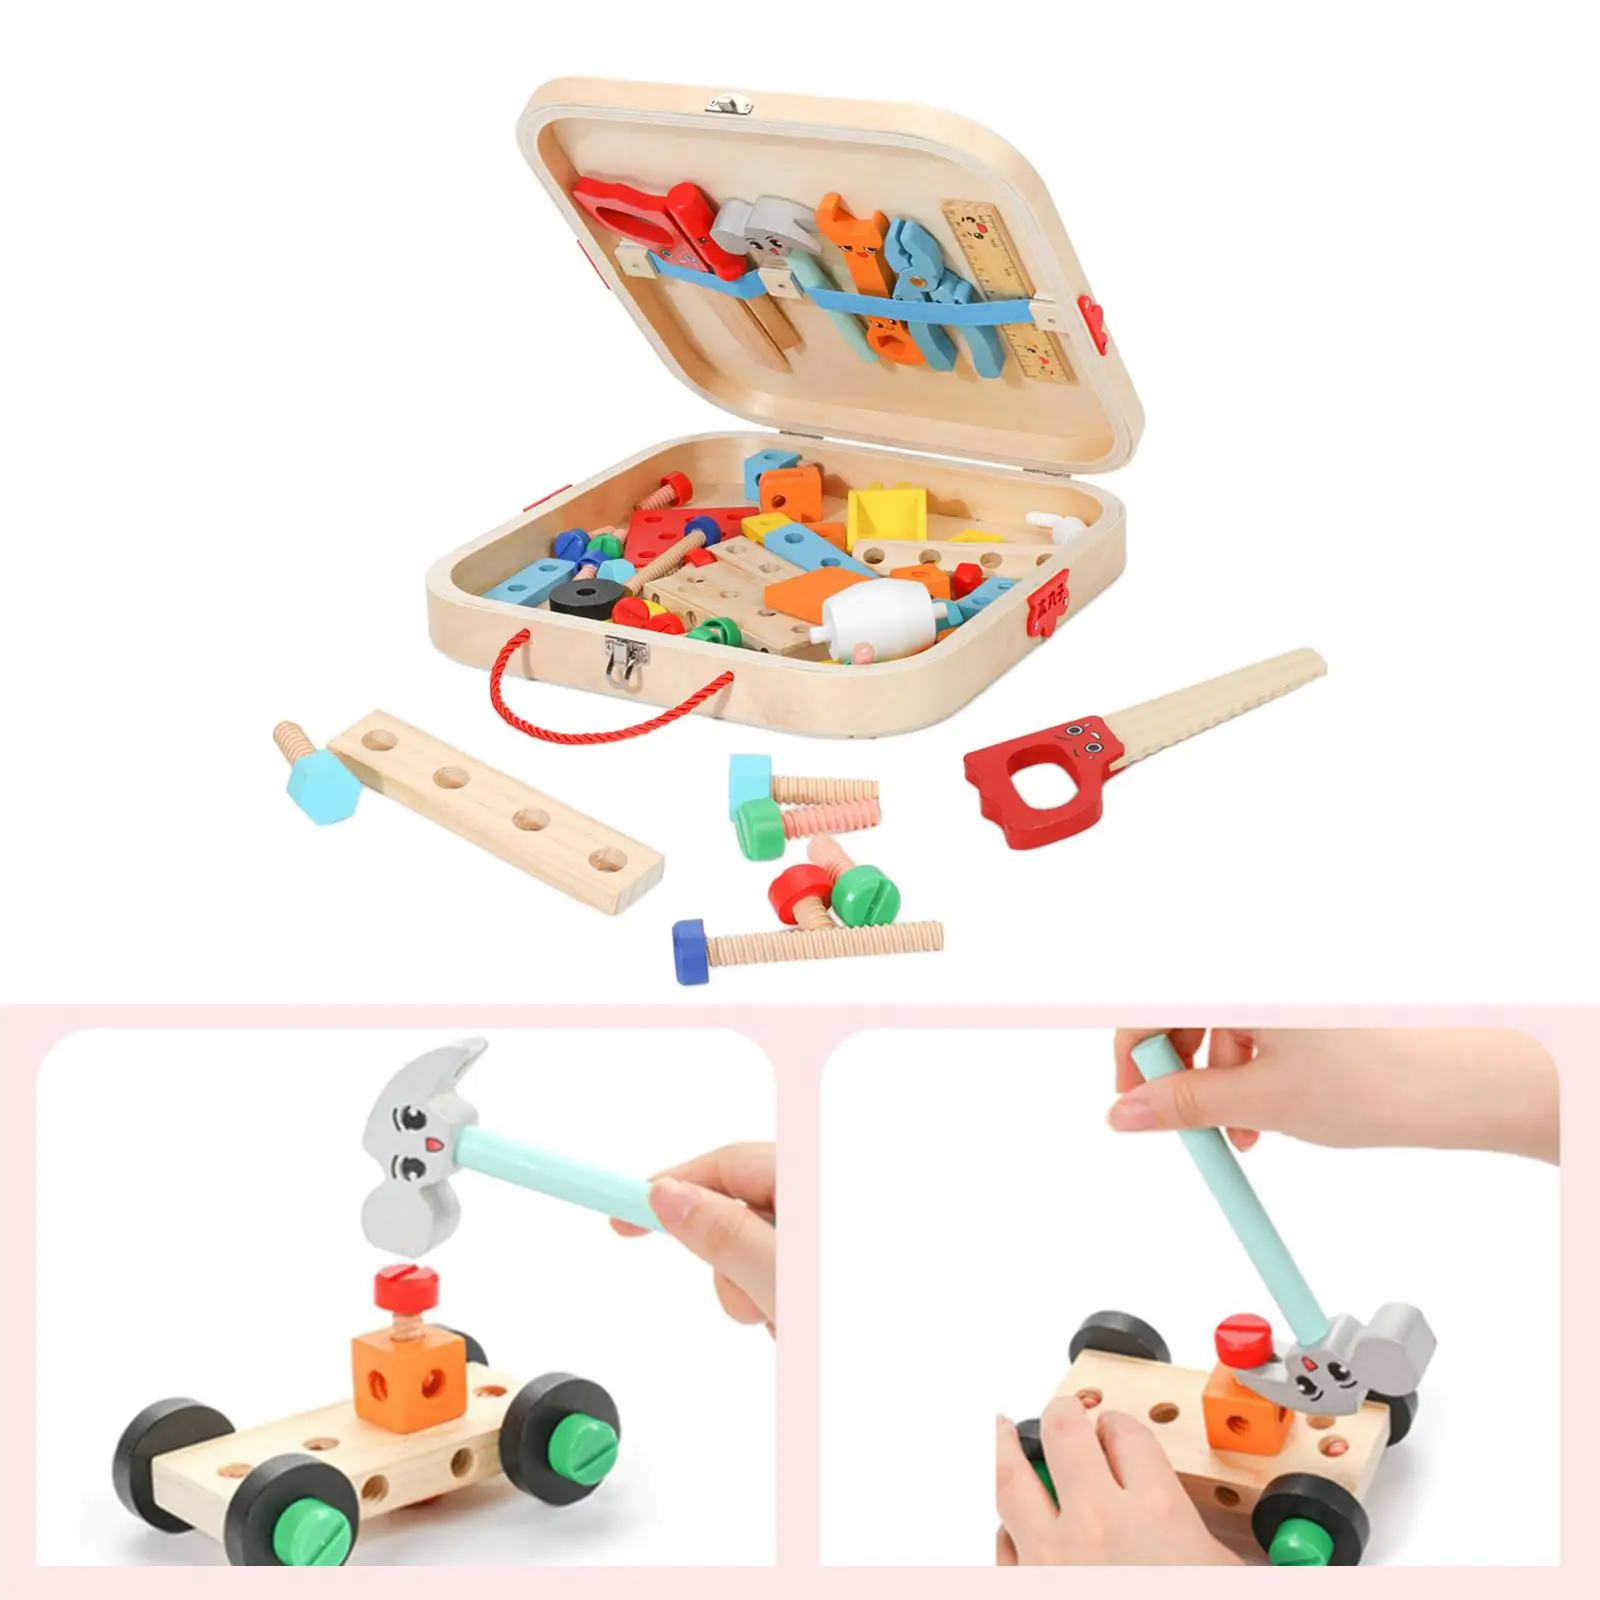 Wooden Kid Tool Set for Toddlers Smooth Fine Motor Skill Wooden Toy Tool Box for DIY Bedroom Birthday Gift Room Toddlers